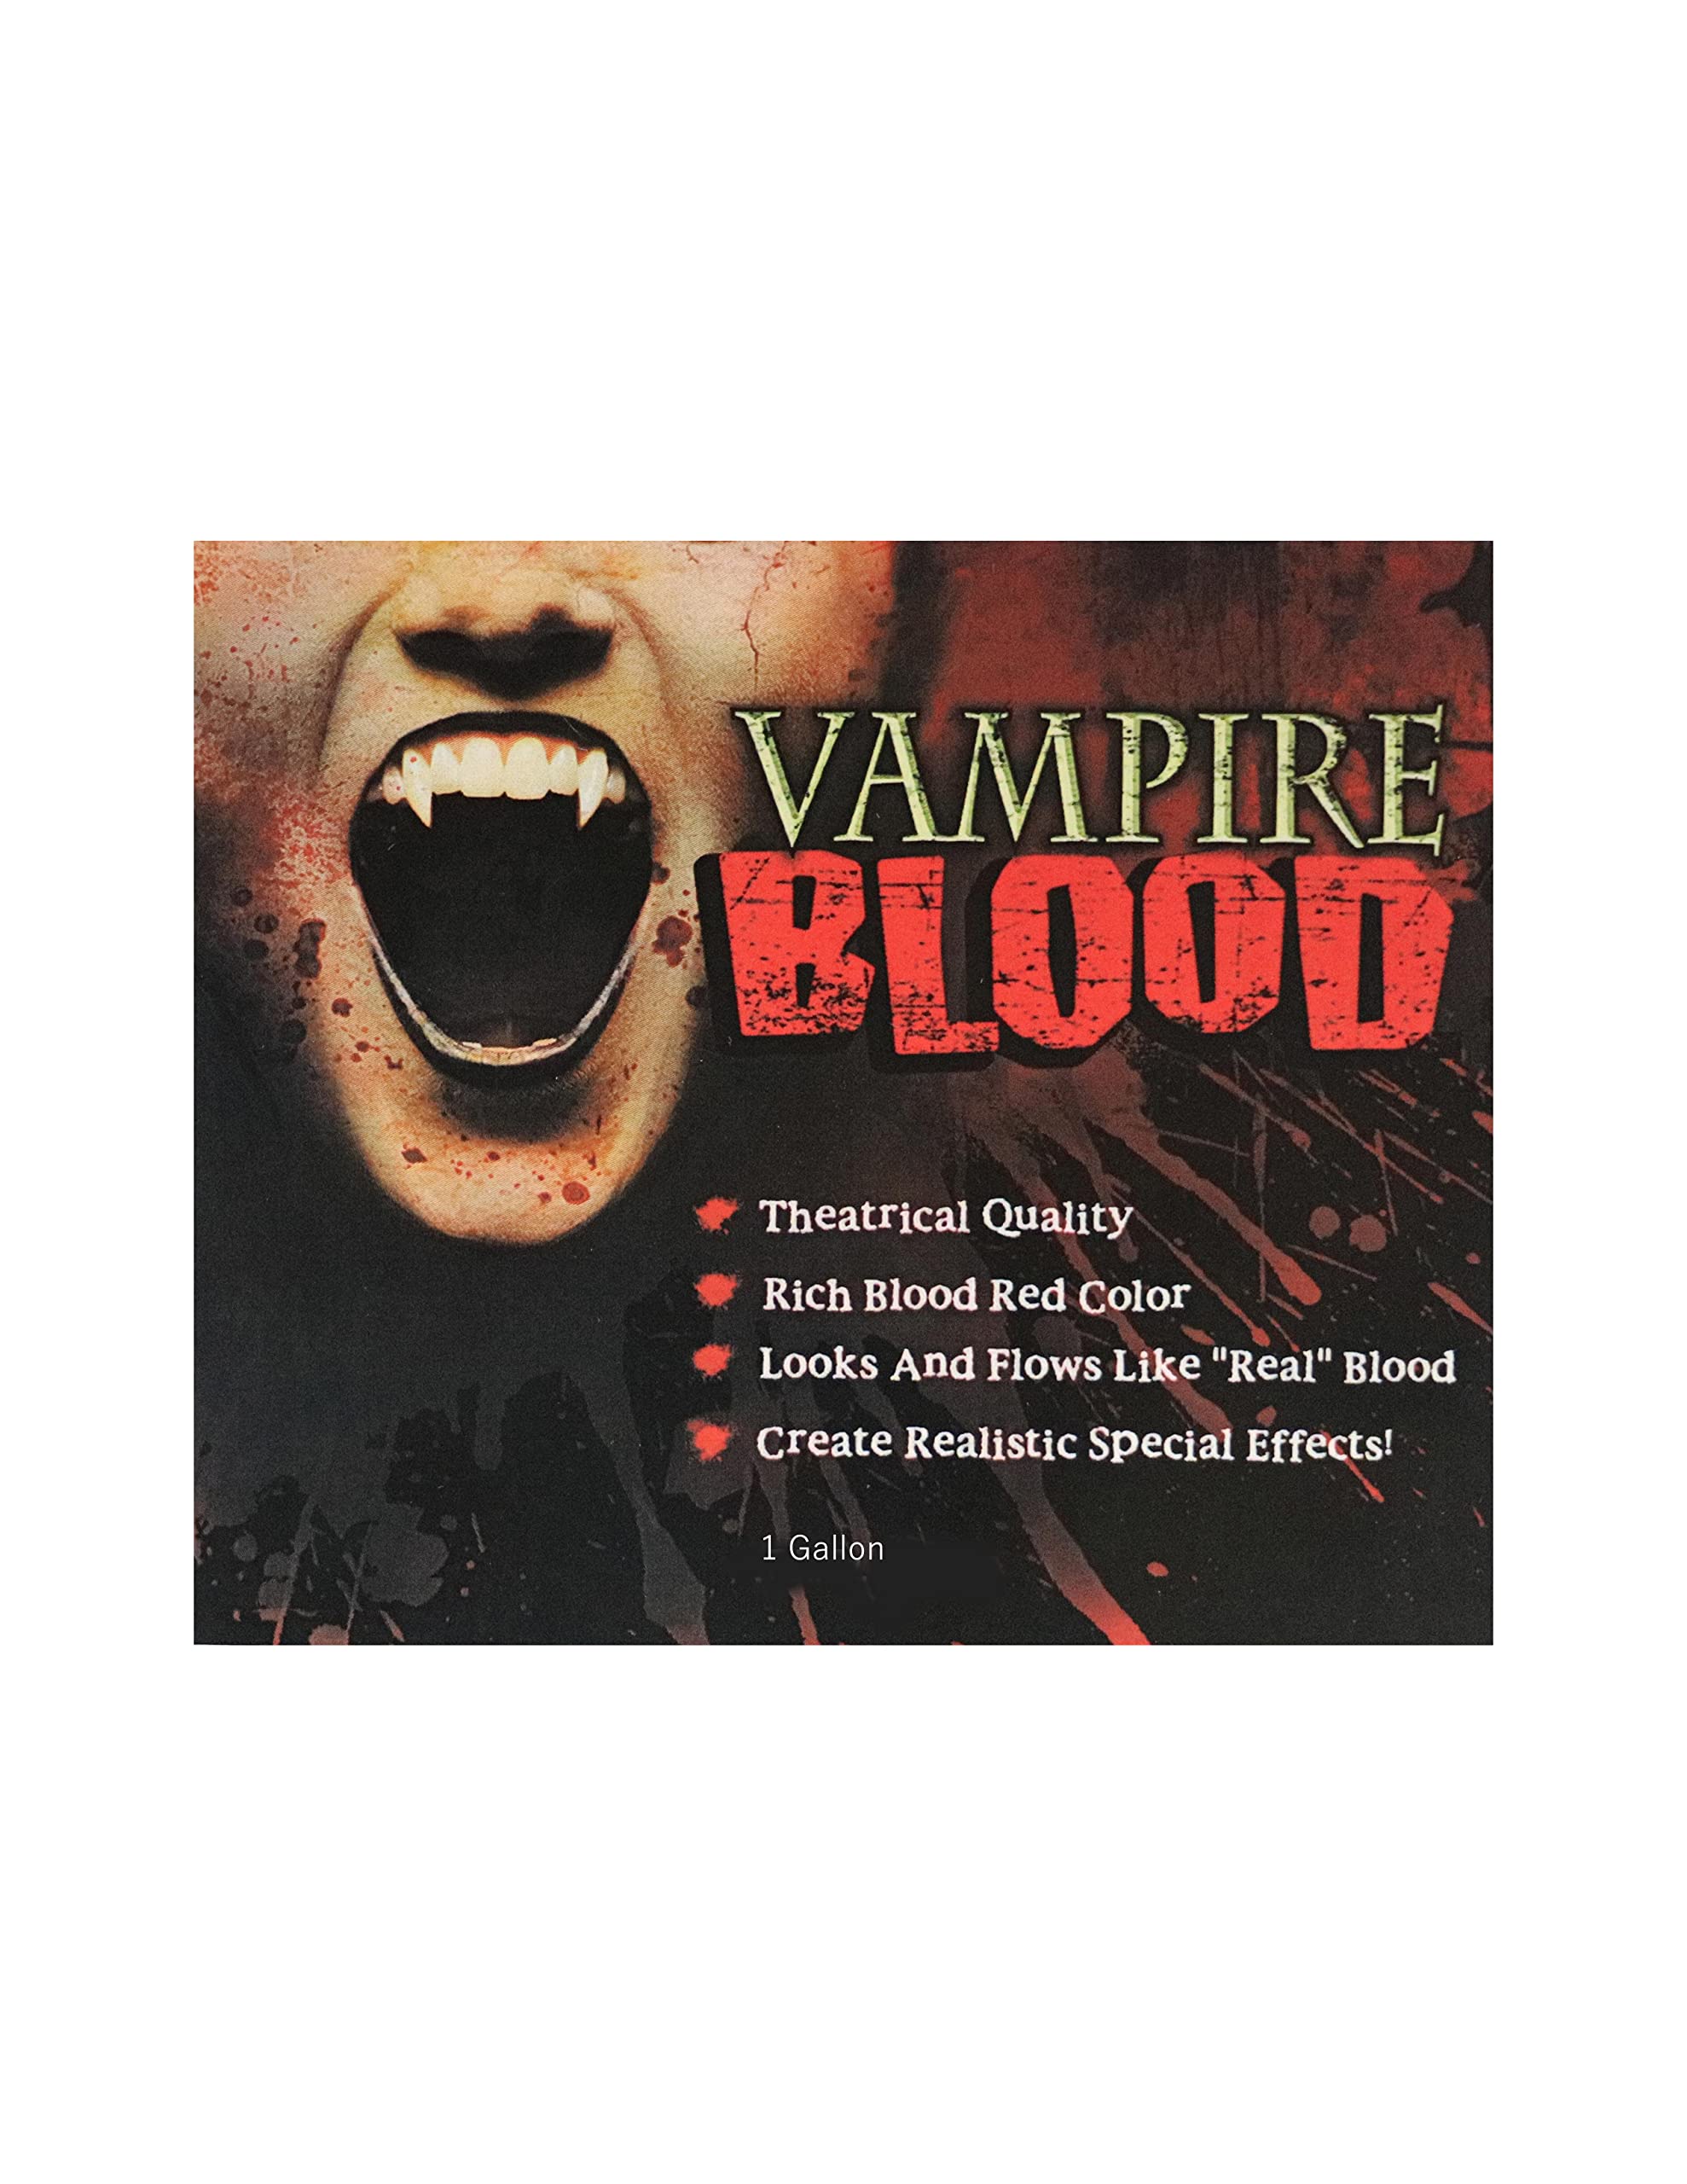 LLF 1 Gallon Fake Vampire Blood for Halloween Costume, Zombie, Vampire and Monster Makeup & Dress Up